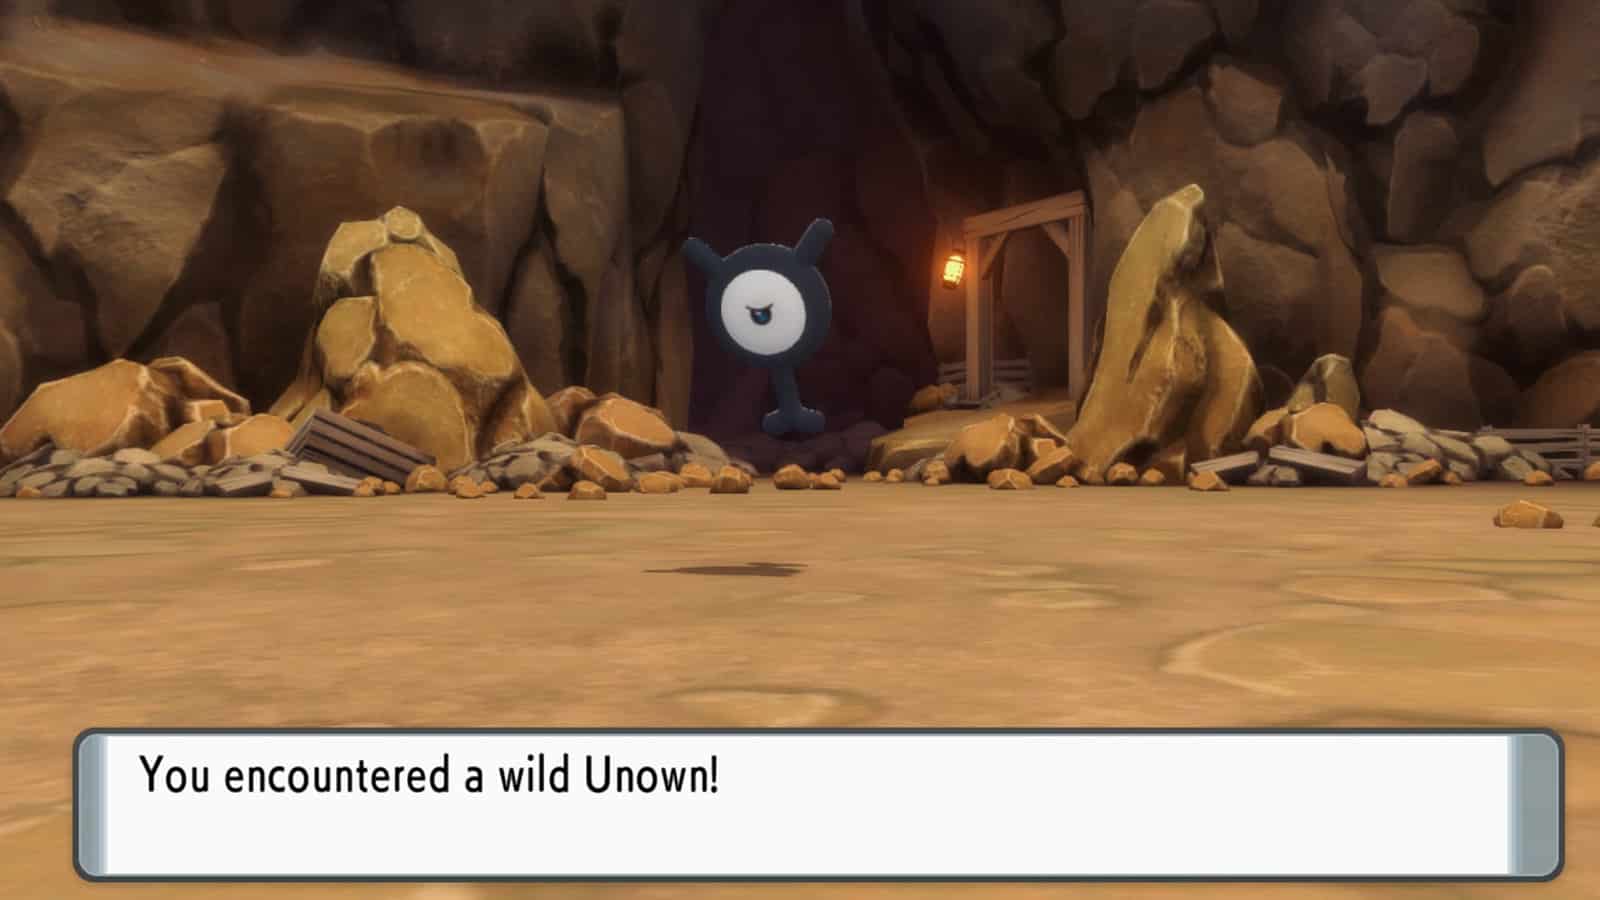 Unown as Pokemon number 114 appearing in the wild